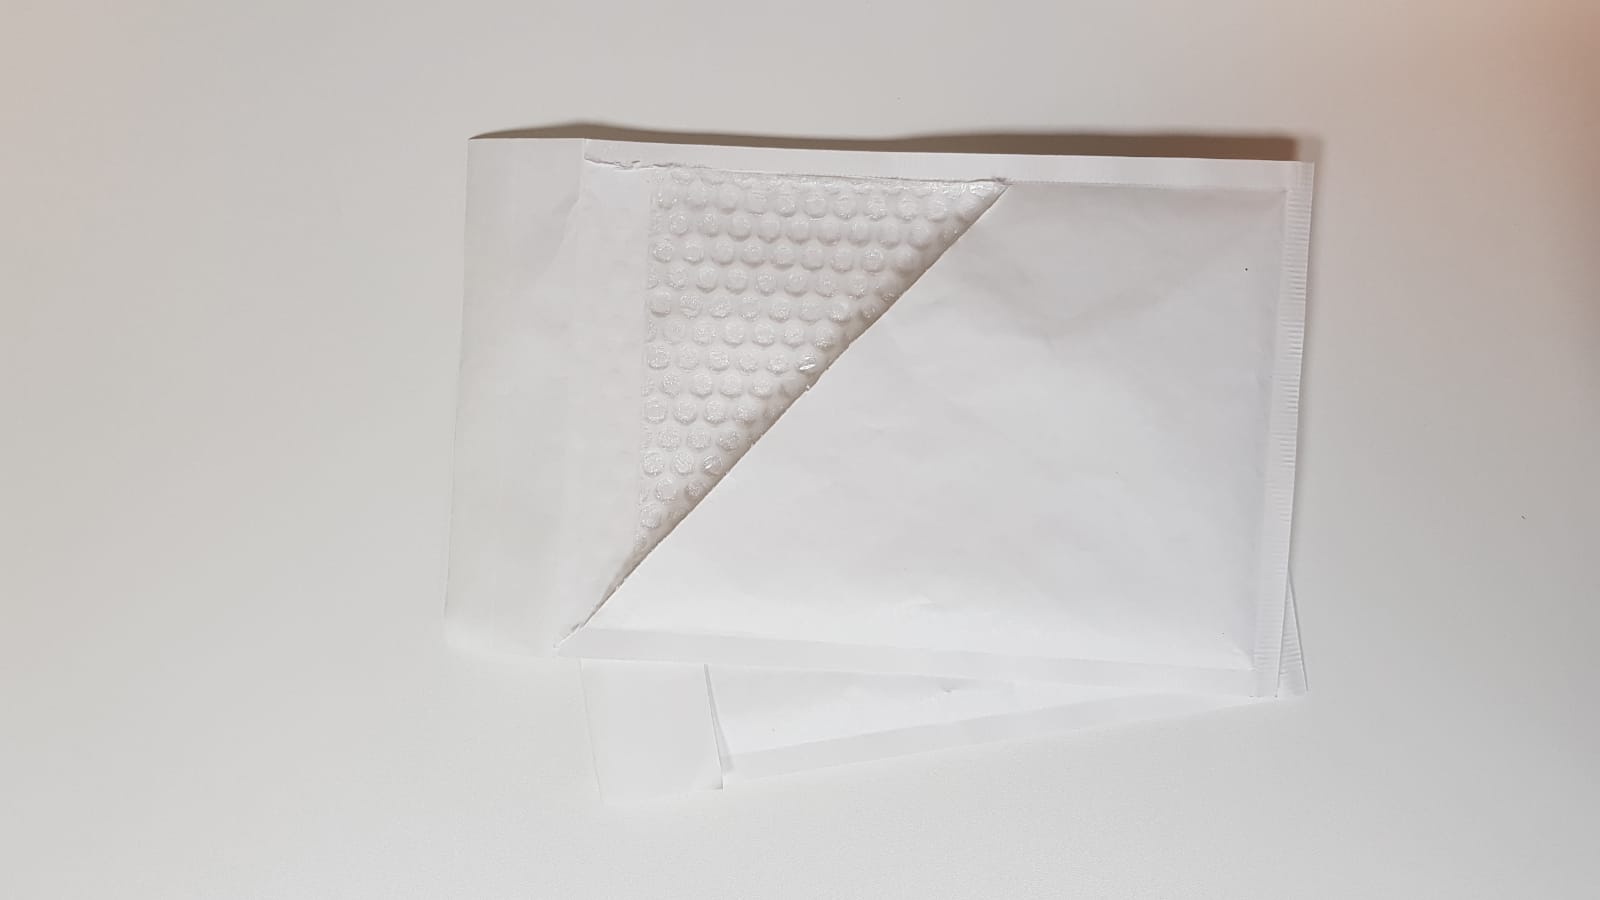 Padded bag 180 X 260 (and various sizes) - Airship White Peel & Seal Padded Bags